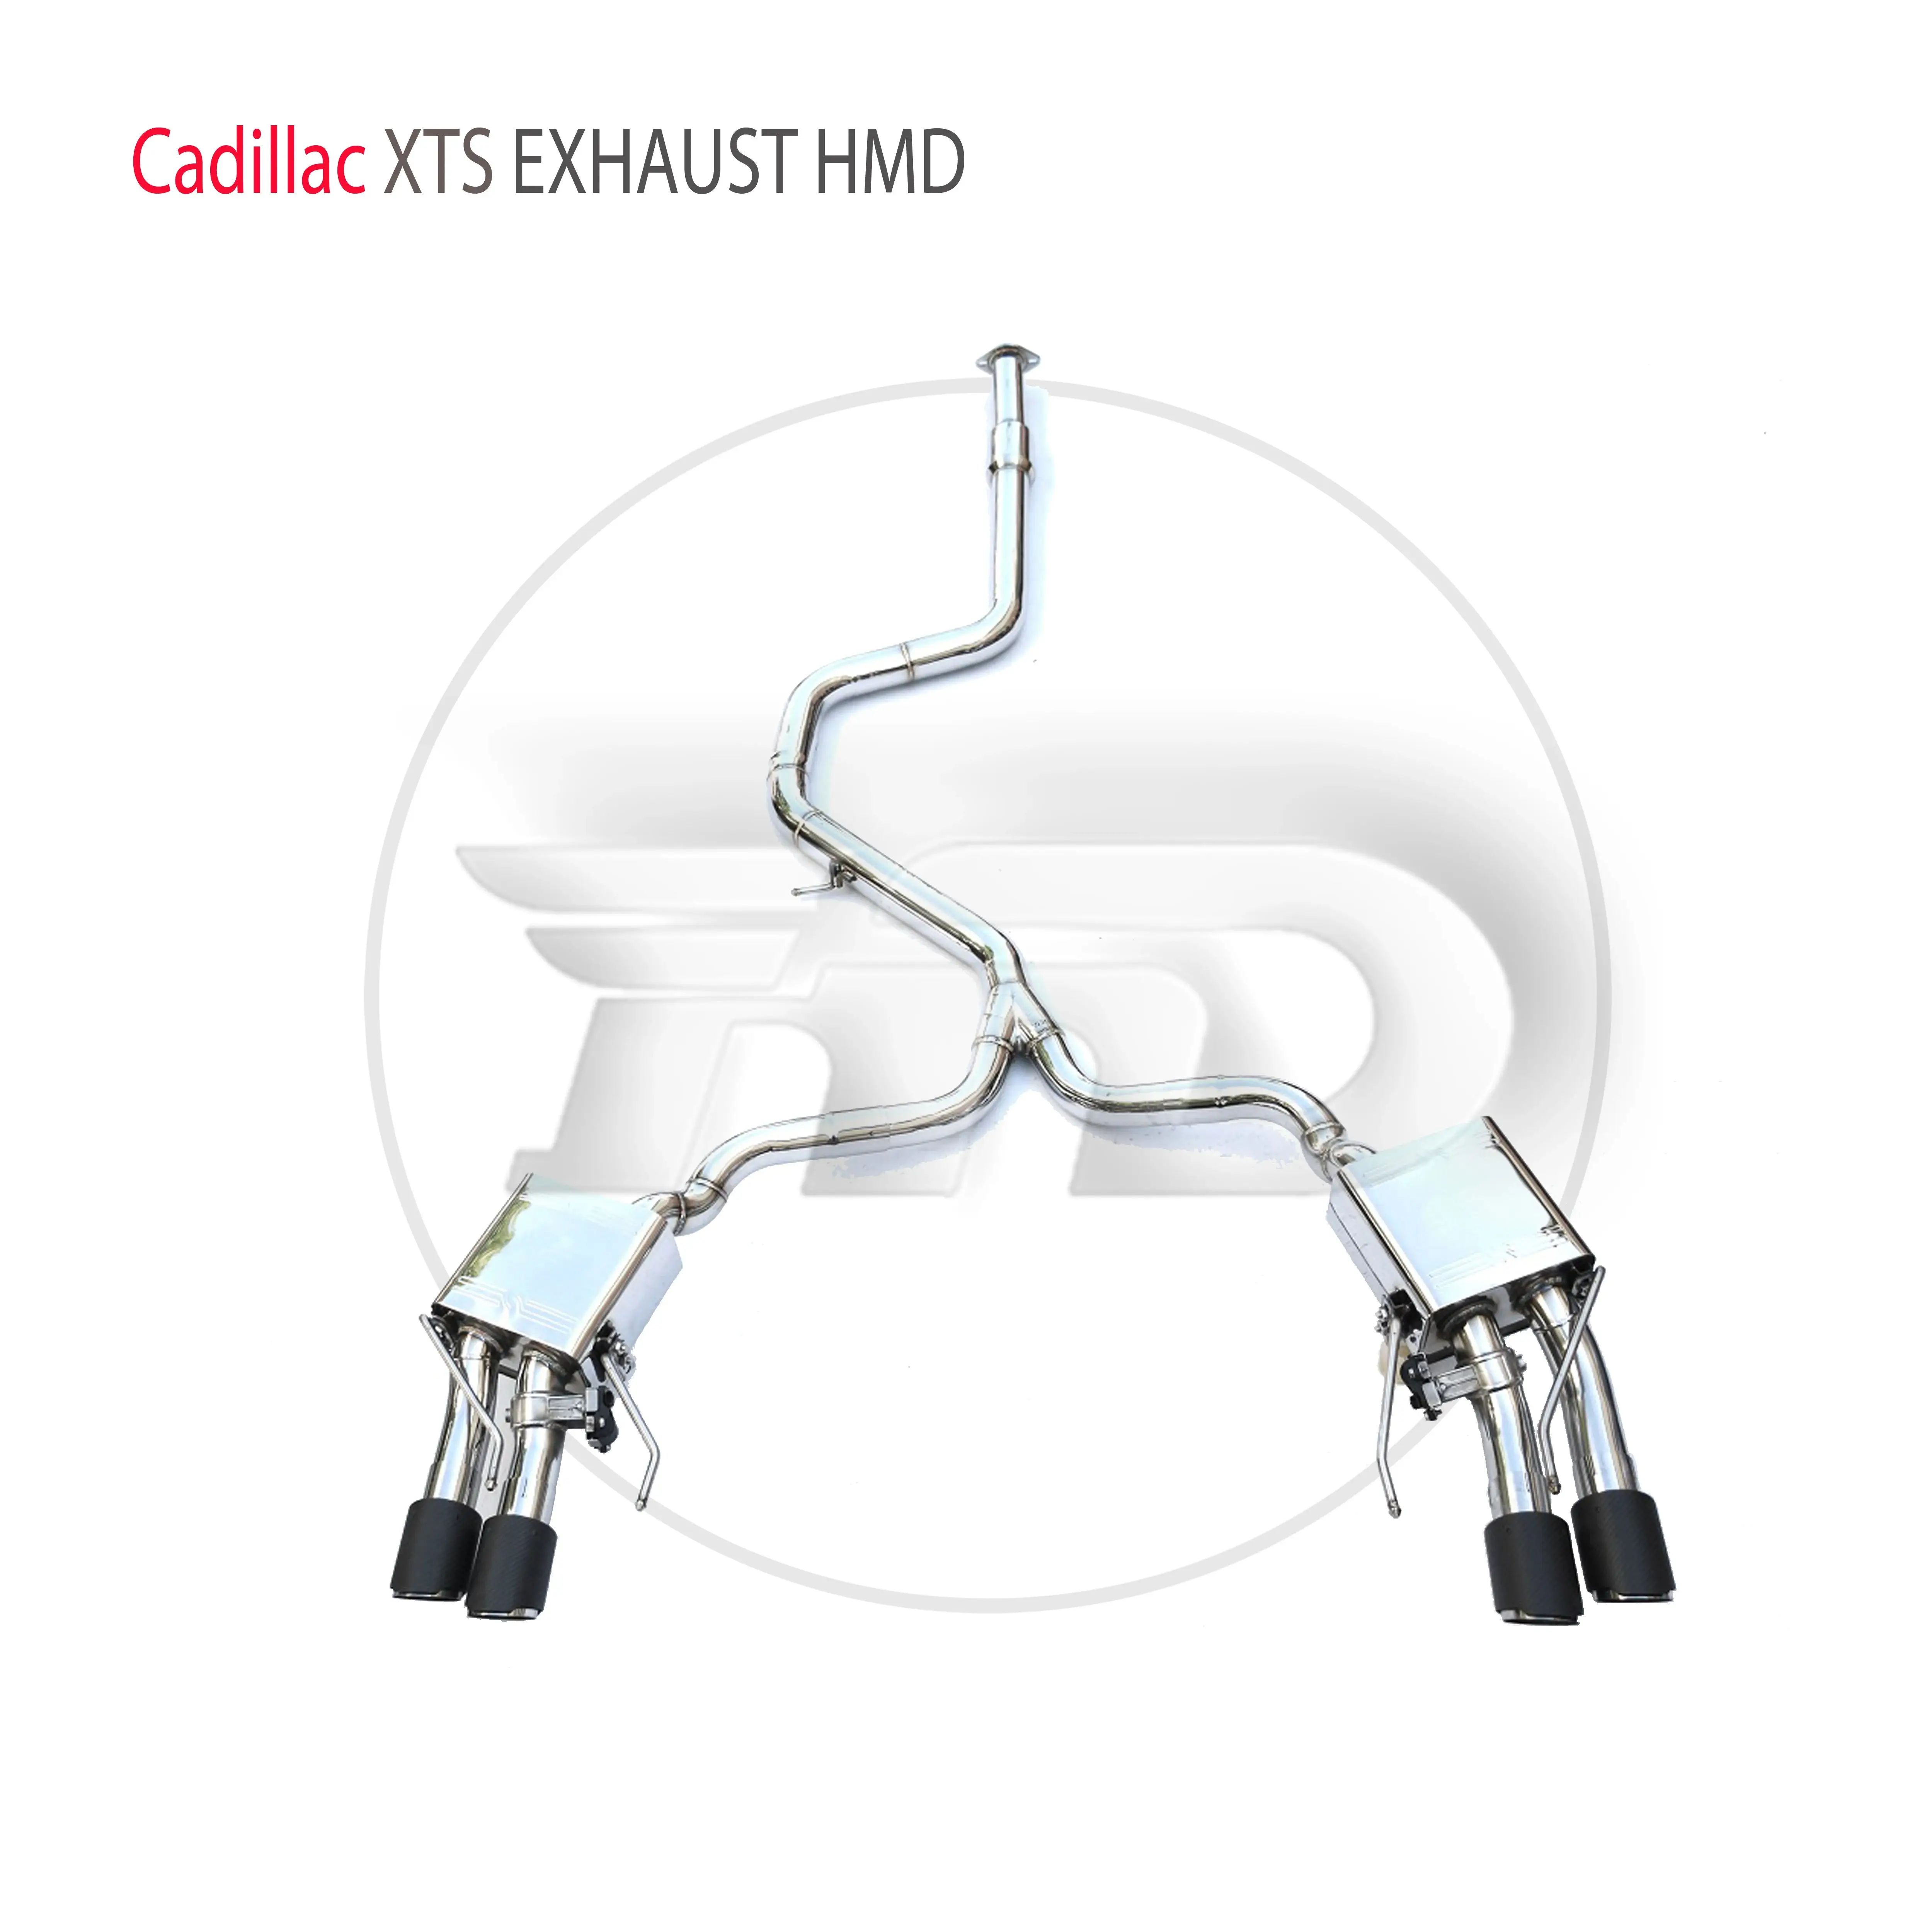 

HMD Stainless Steel Exhaust System Catback is Suitable for Cadillac XTS Performance Car Valve Muffler